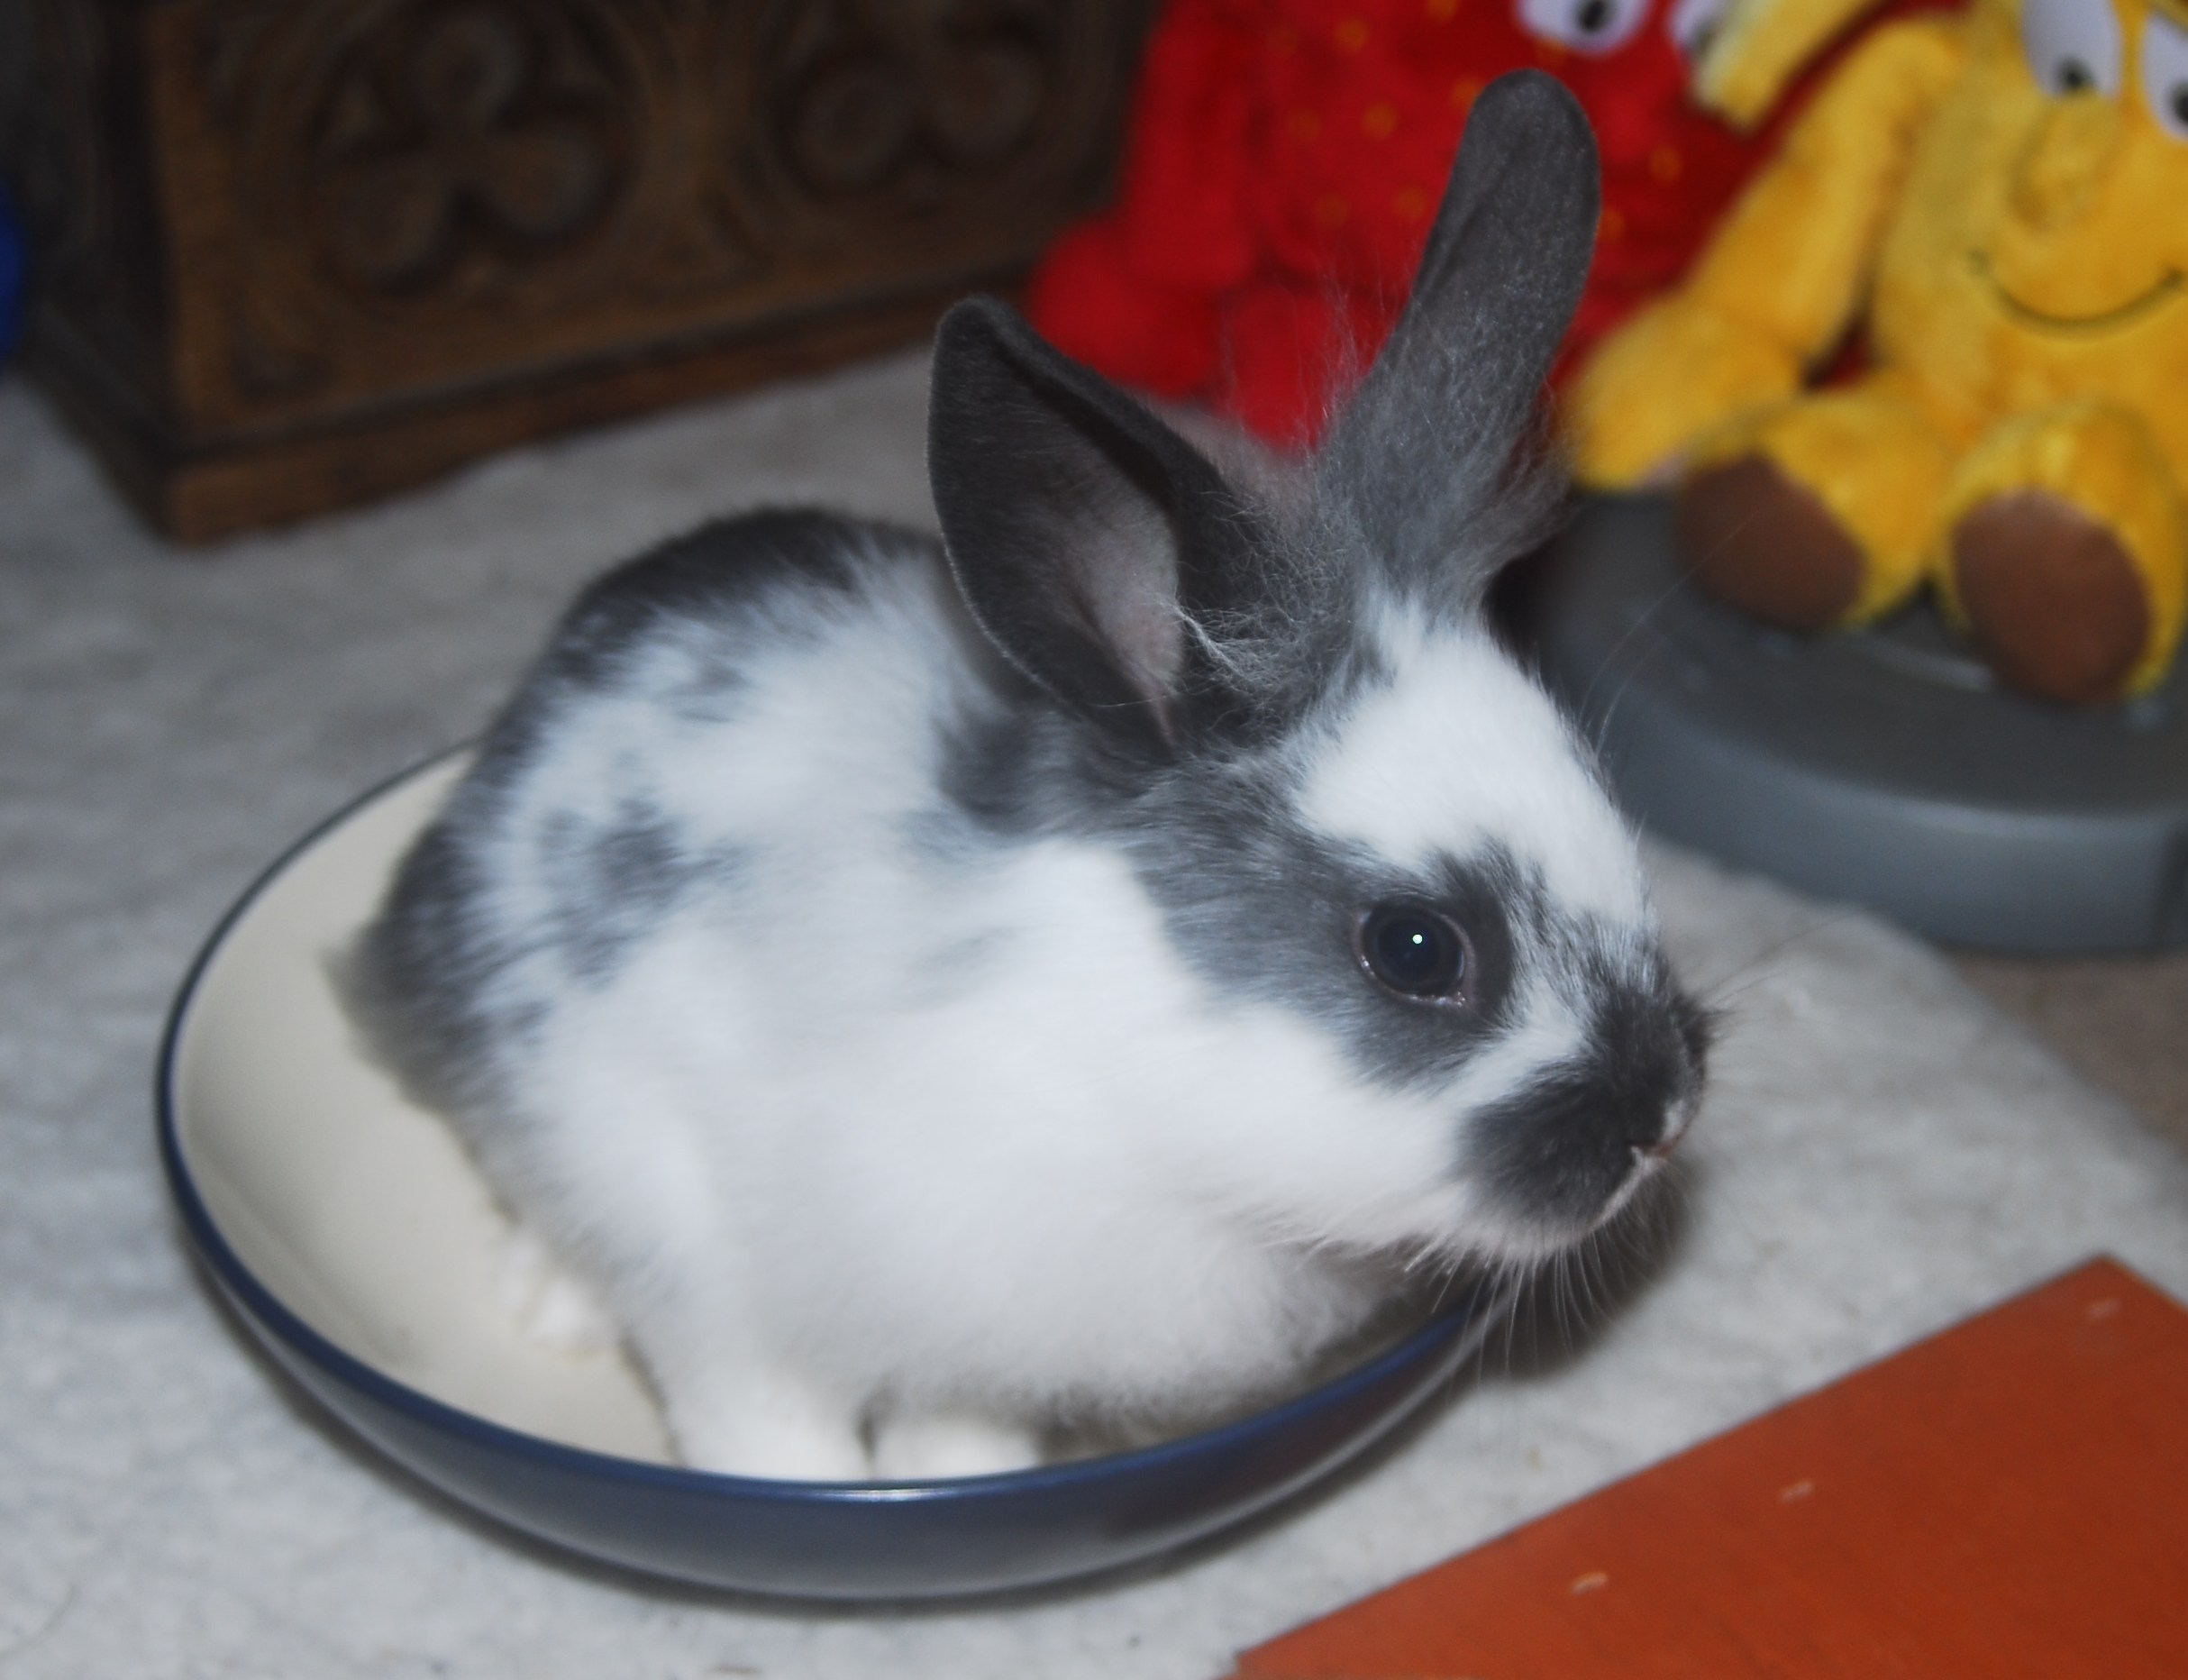 Bunny Is So Excited for Veggies He Hopped in the Salad Bowl